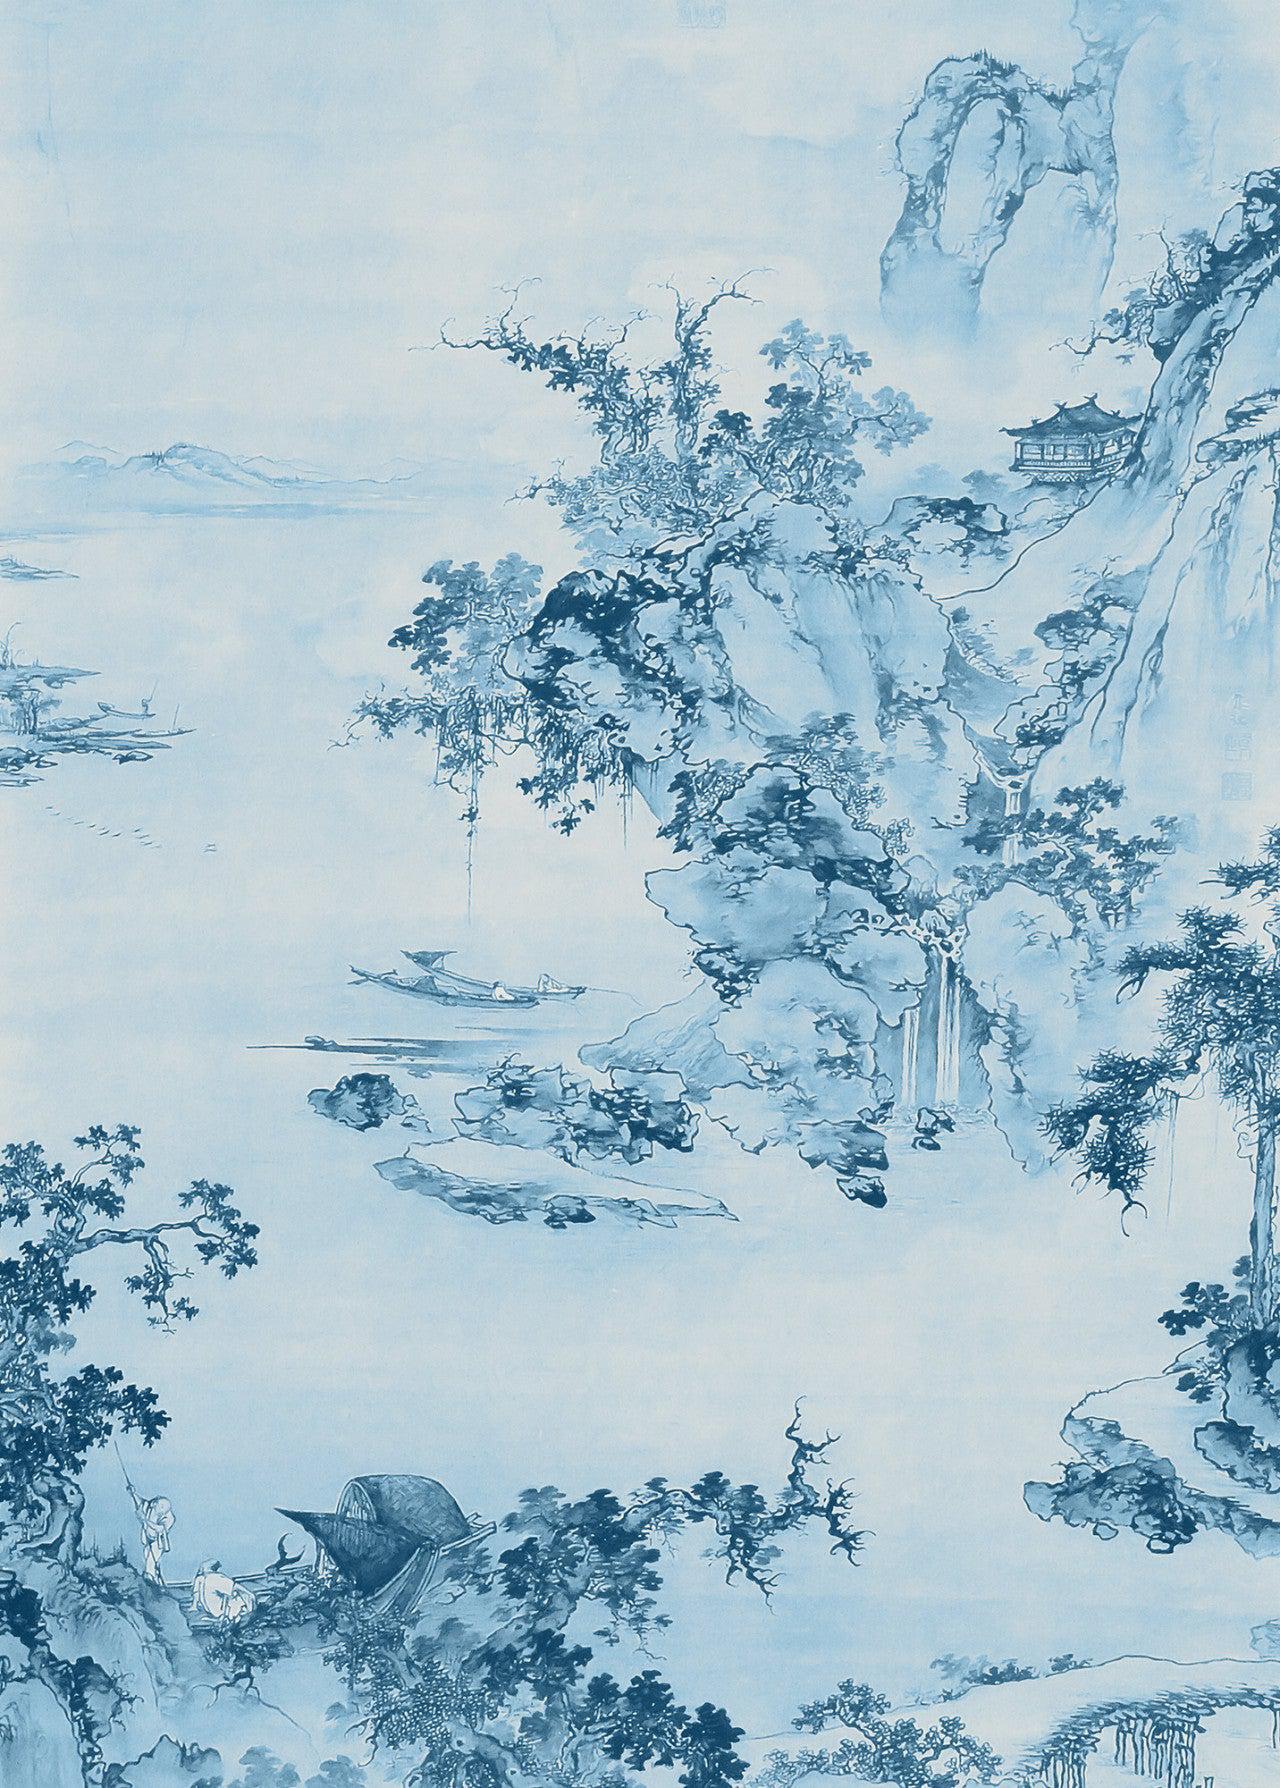 Blue China Mural Wallpaper-Wall Decor-ART WALLPAPER, ECO MURALS, MURALS, MURALS / WALLPAPERS, NON-WOVEN WALLPAPER, SUSTAINABLE DECOR-Forest Homes-Nature inspired decor-Nature decor